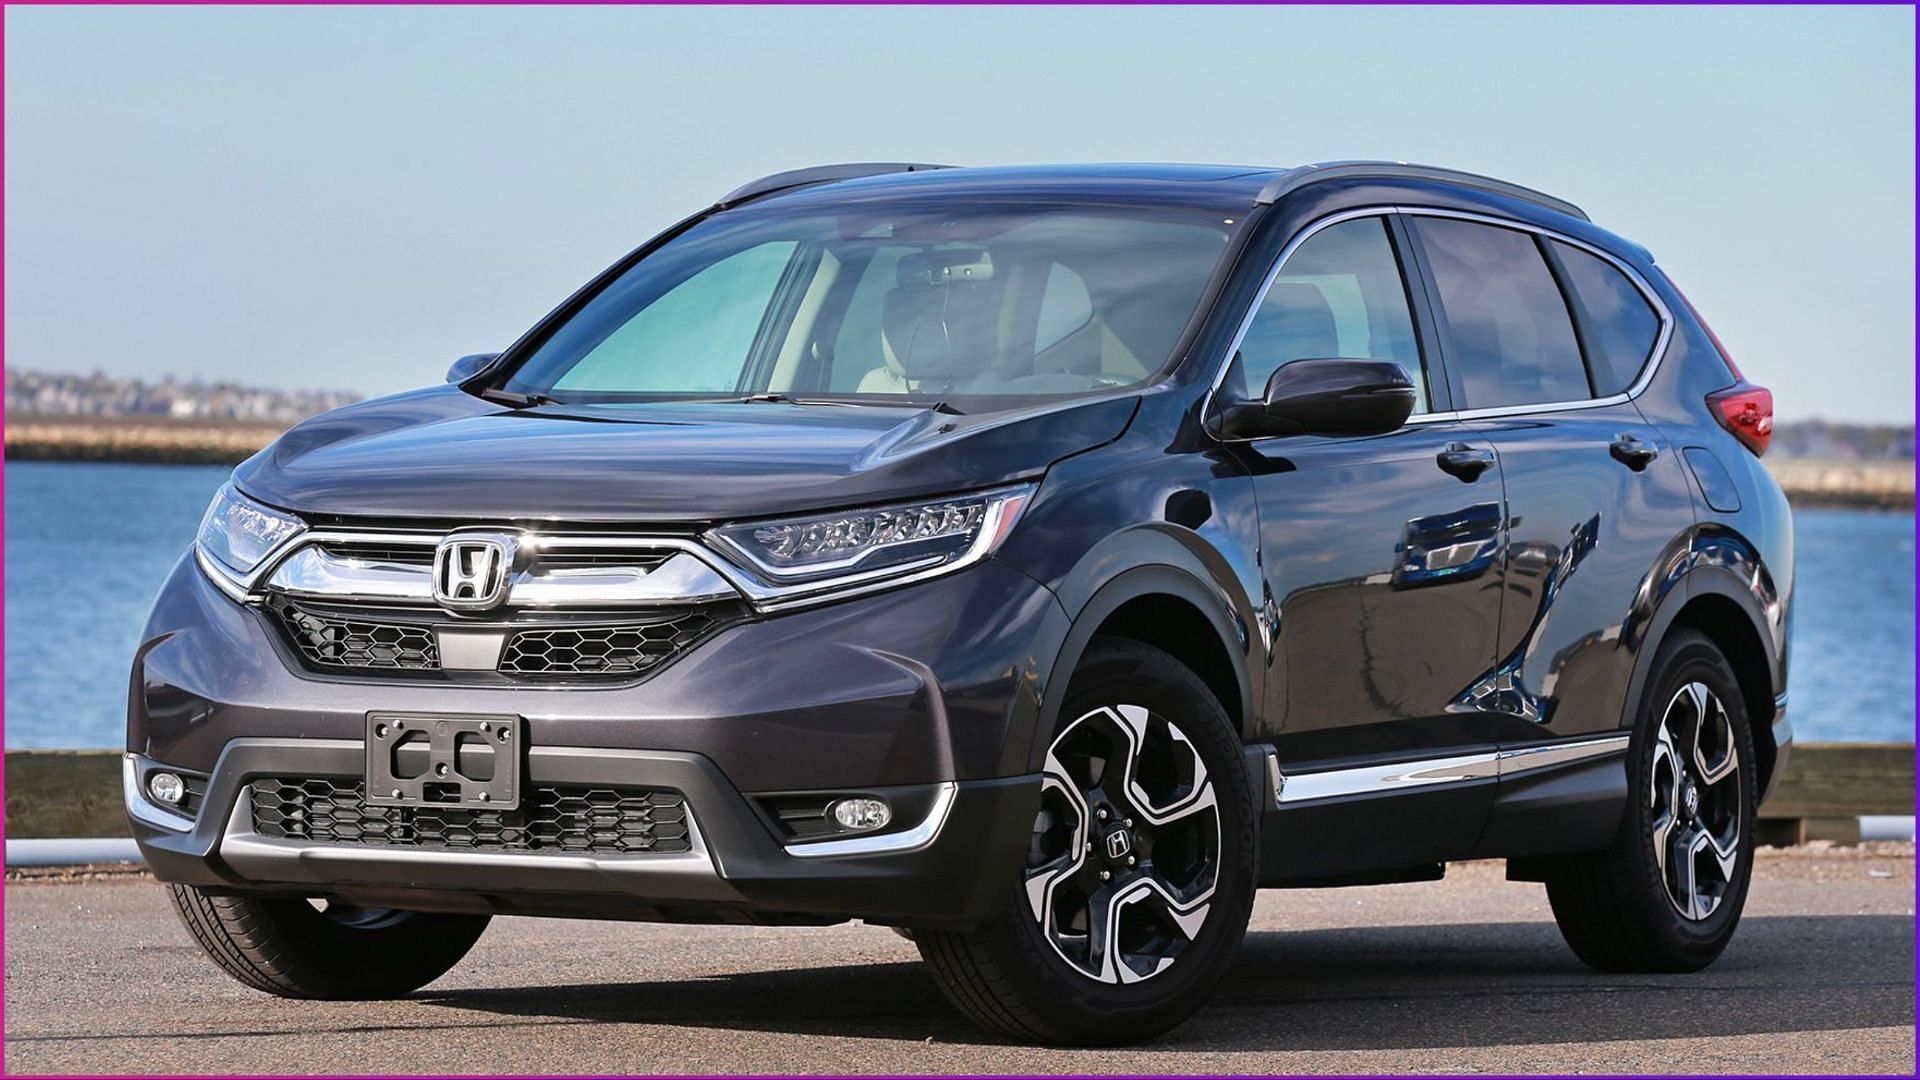 Honda CRV recall reason, affected vehicles, and other details explored